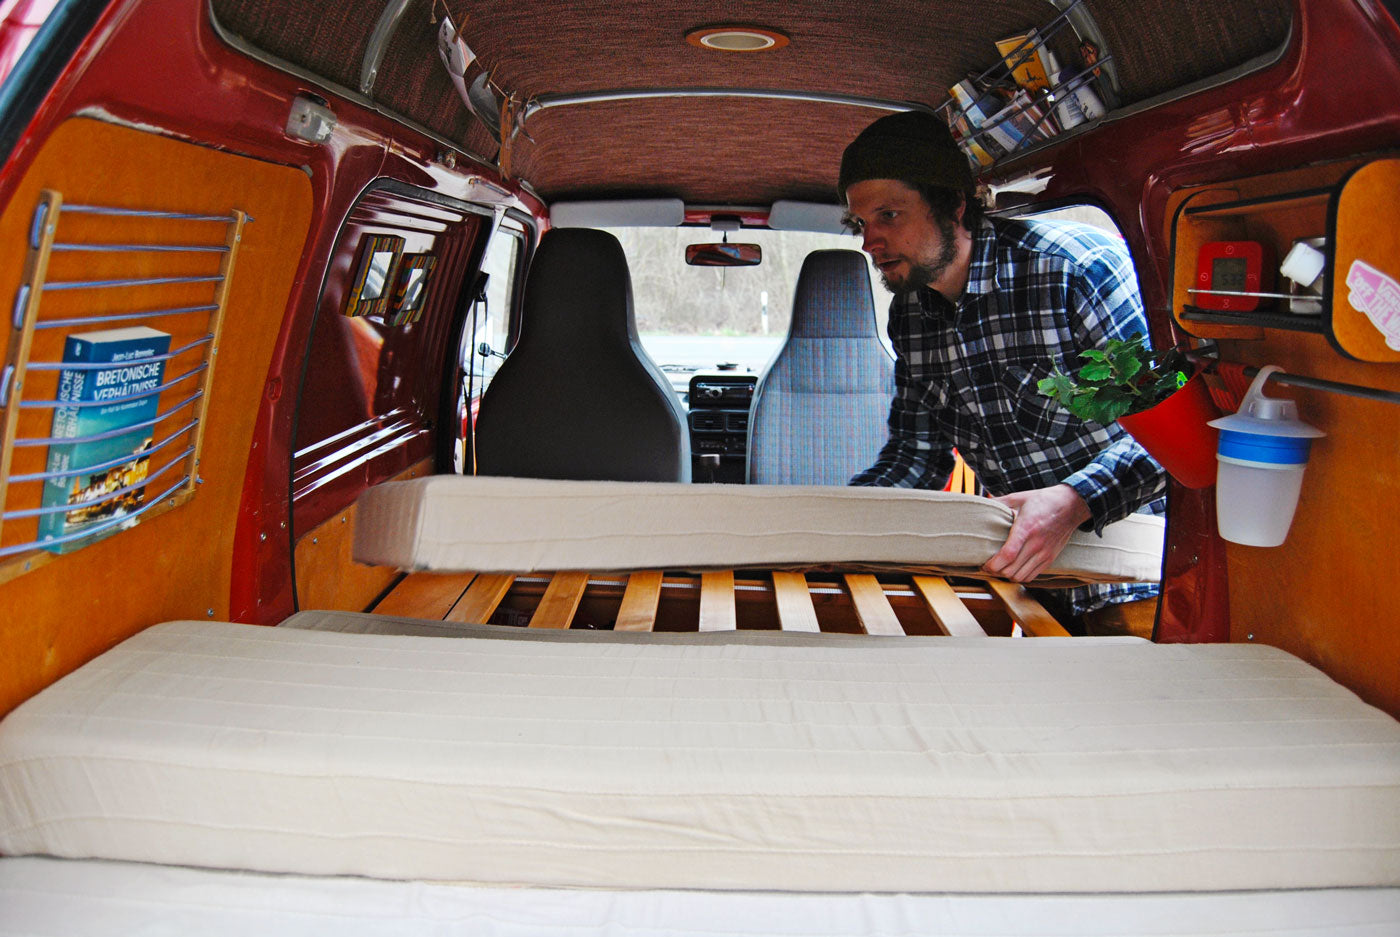 The inside of this Daihatsu Hijet measures only 3 x 1.4 x 1.8 metres. Still there is room for a bed, table, and clothing storage. (Photo: Daniel Kalinowski)